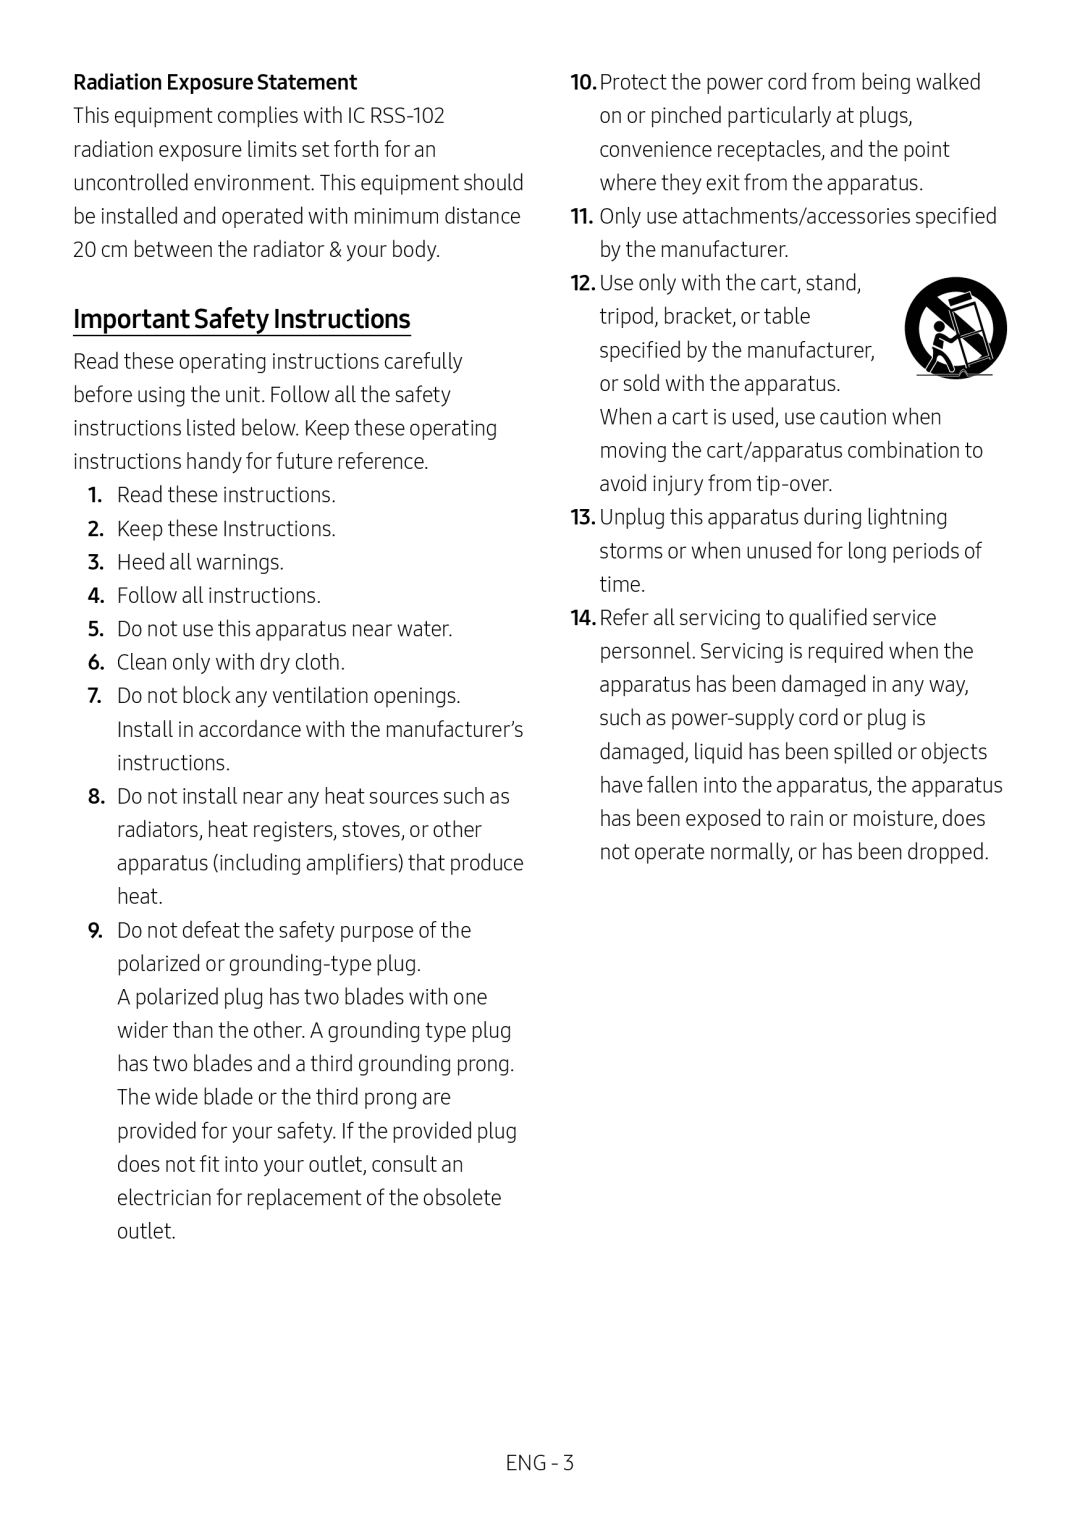 Important Safety Instructions Standard HW-B53C